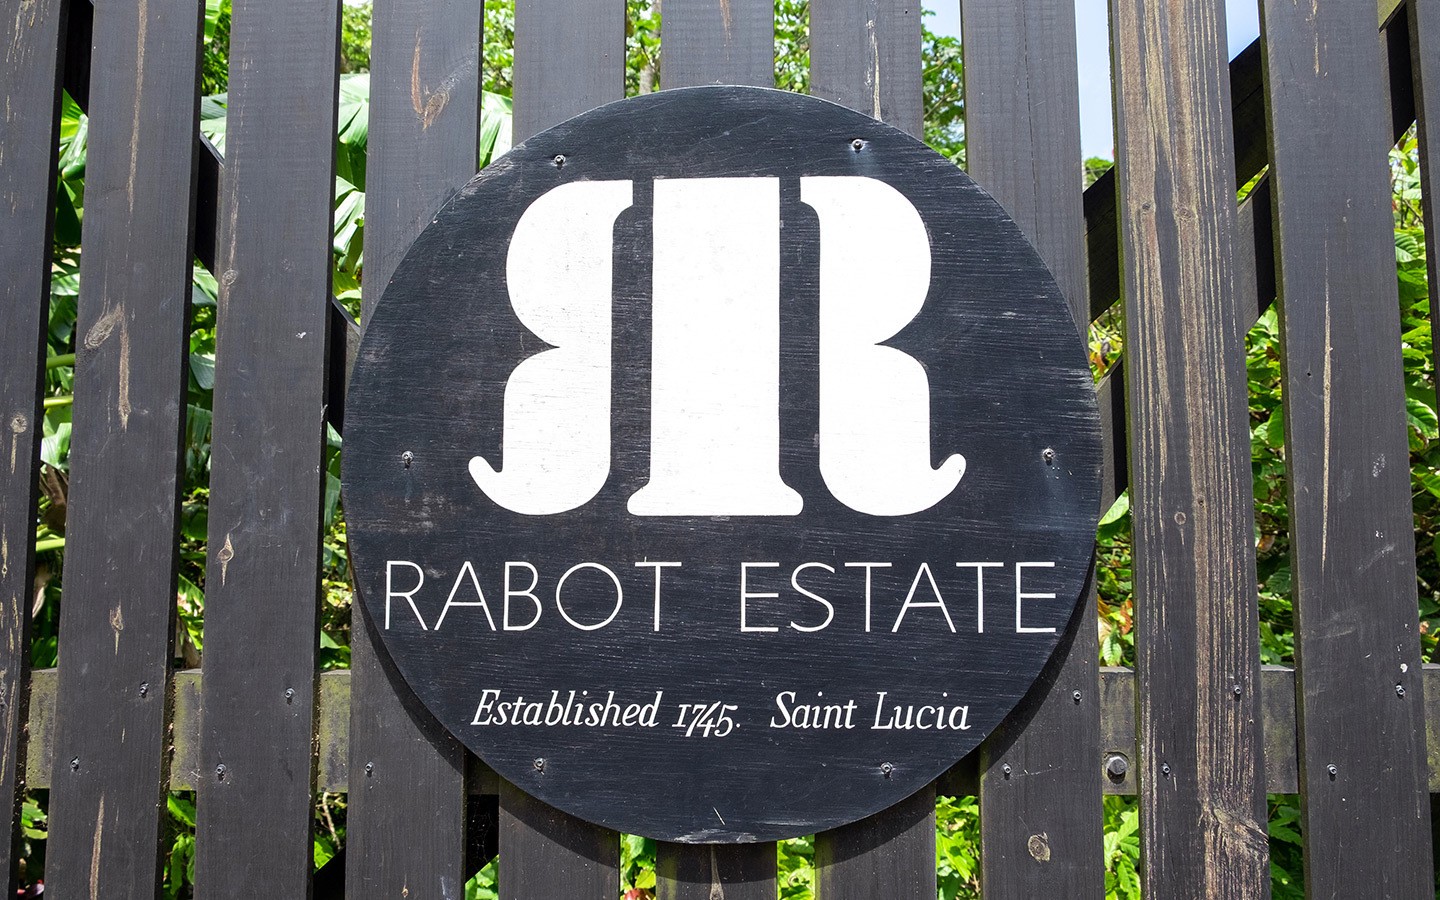 Gateway to Rabot Estate in St Lucia